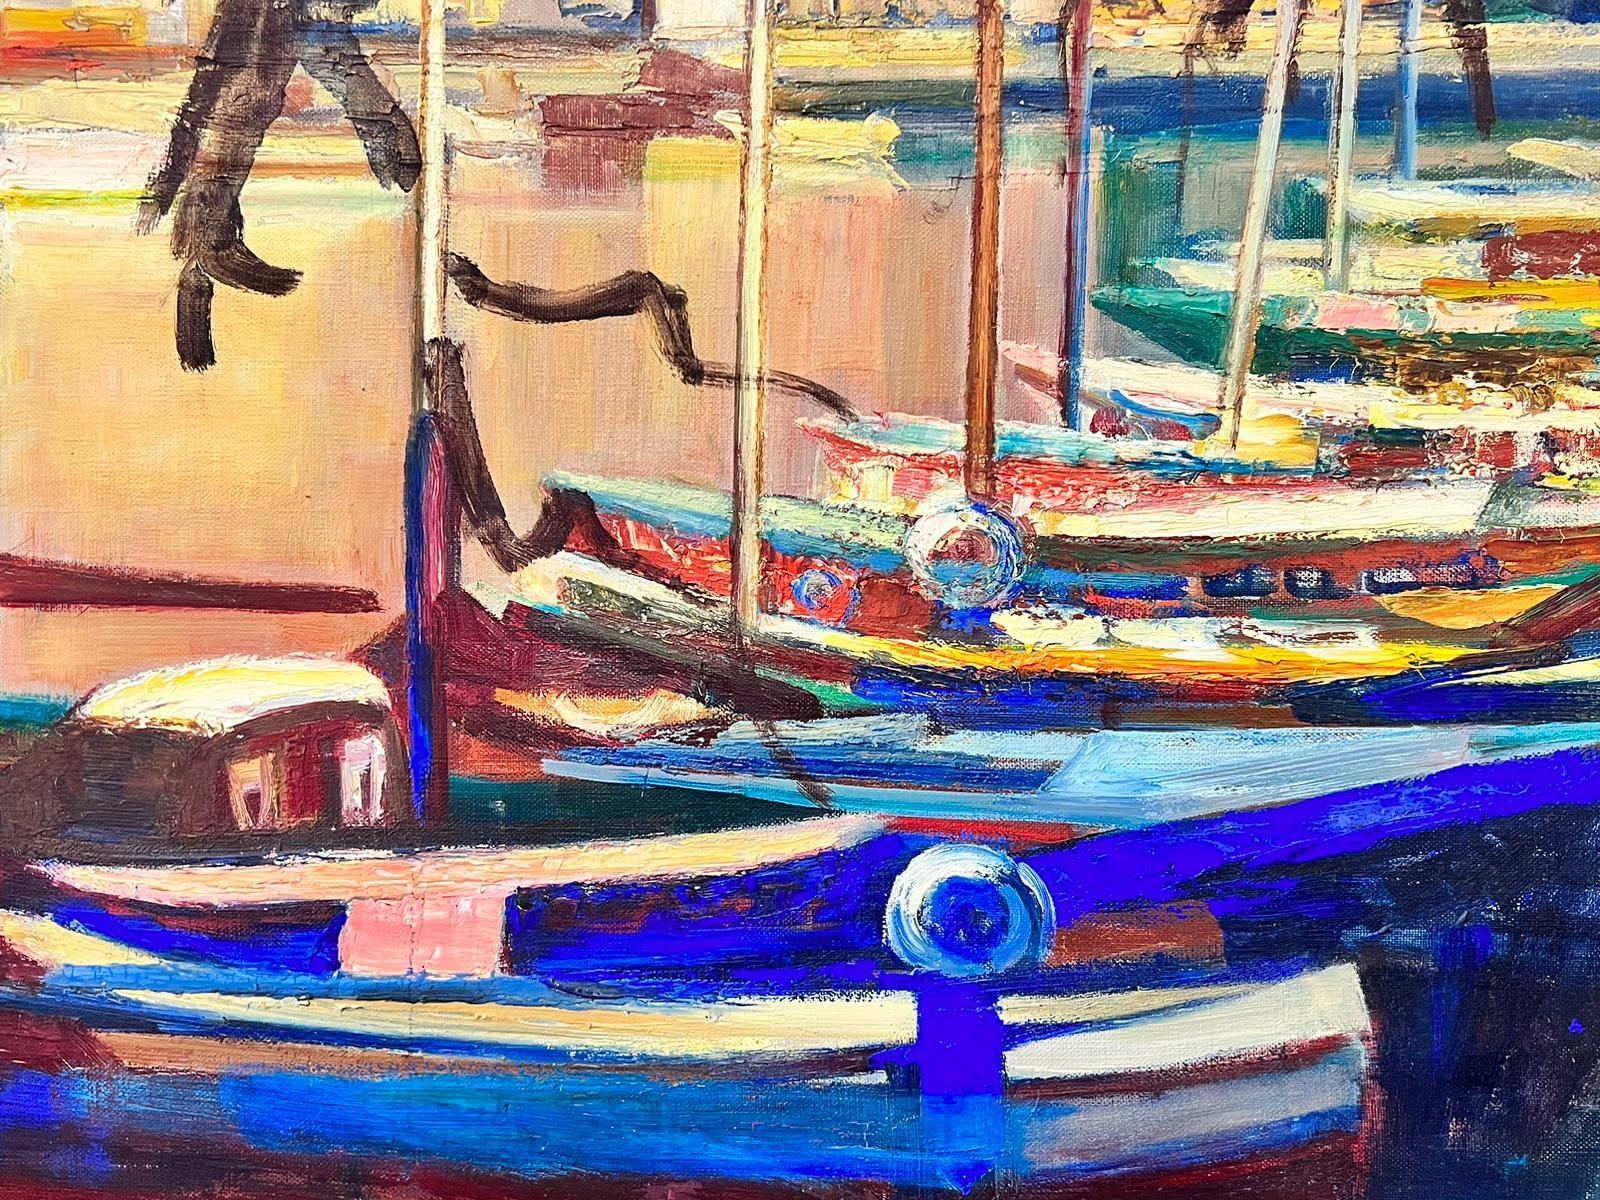 Sunset over Blue Boats in Harbor Very Large 1970’s French Signed Oil on Canvas - Post-Impressionist Painting by Josine Vignon